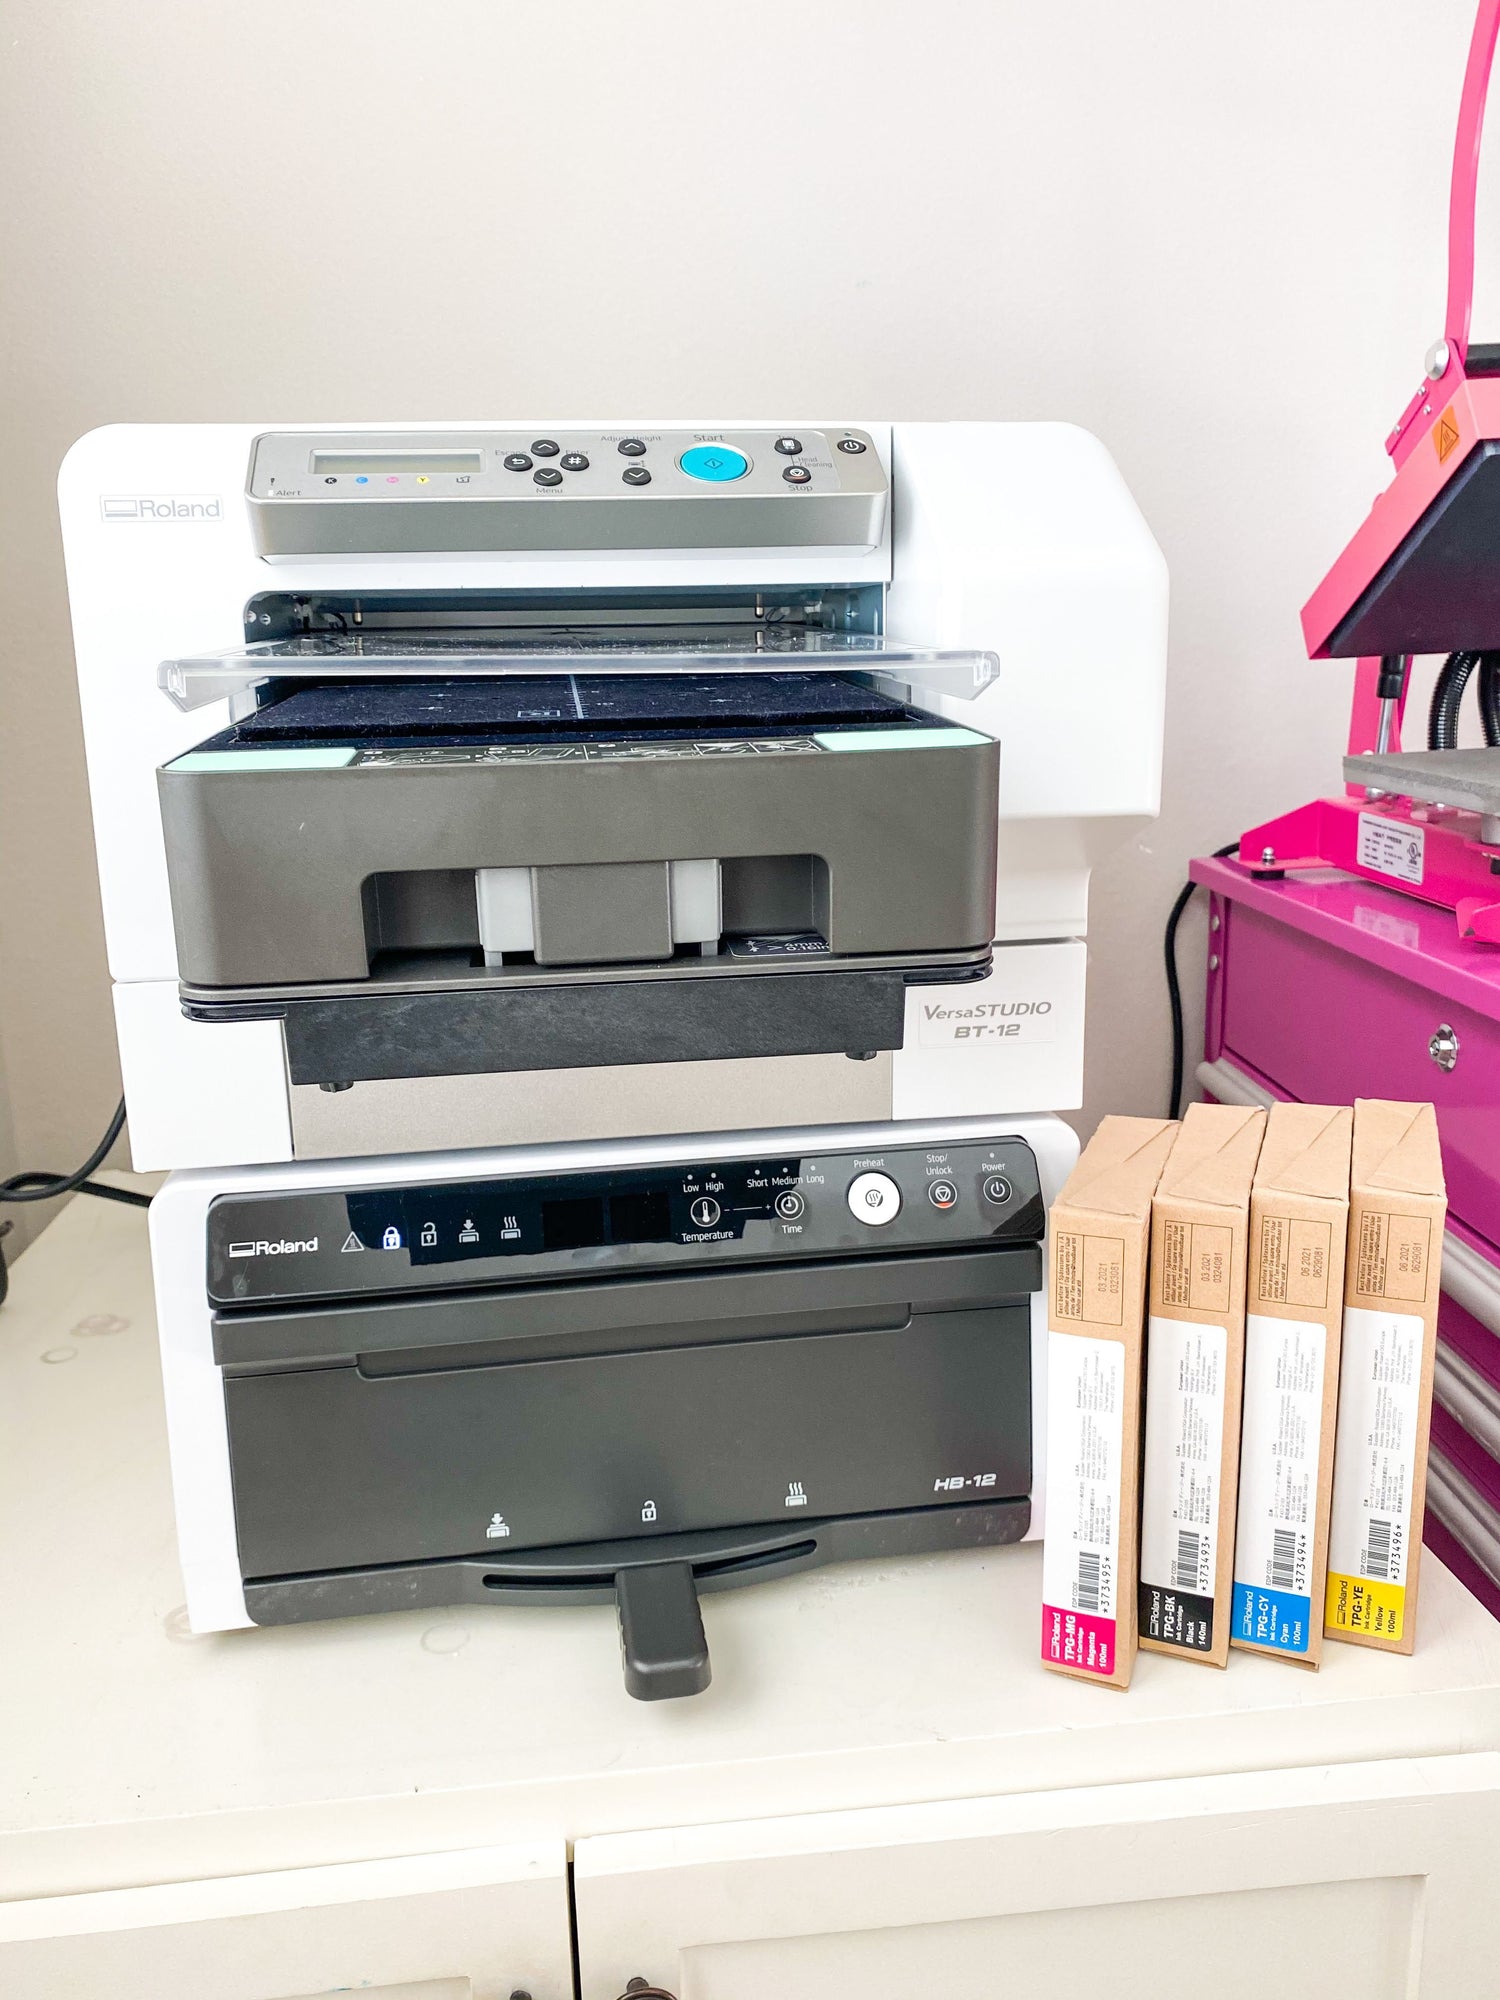 How to start your boutique with a DTG printer